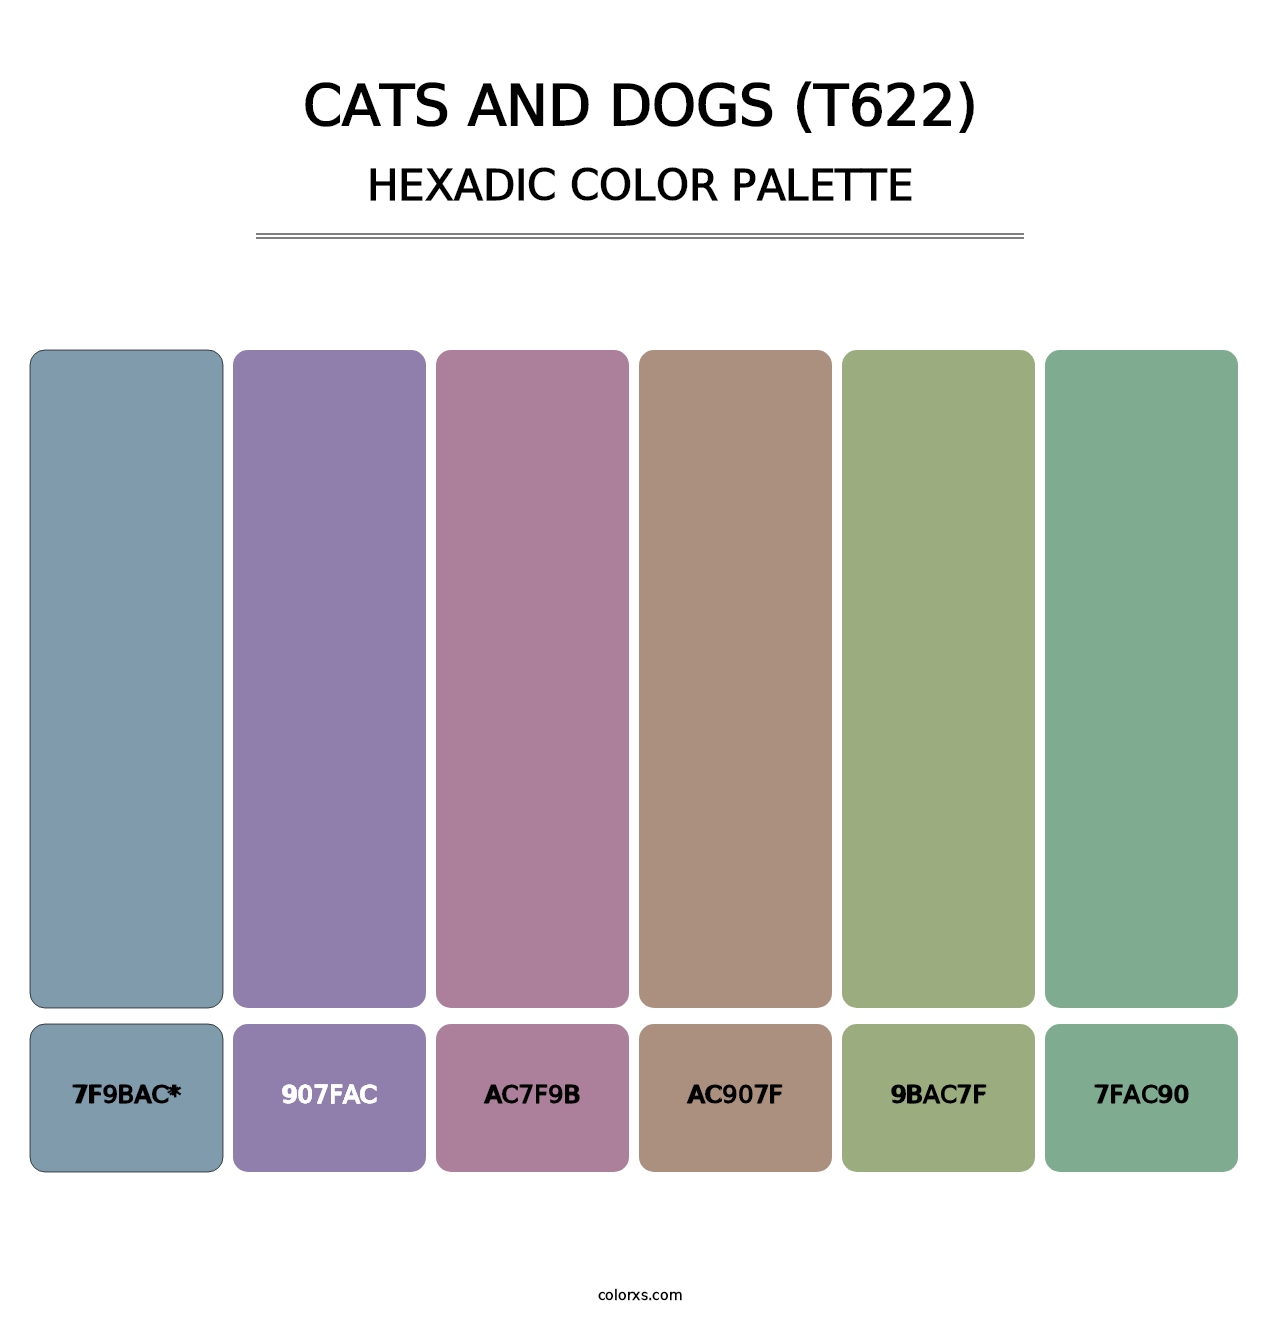 Cats and Dogs (T622) - Hexadic Color Palette